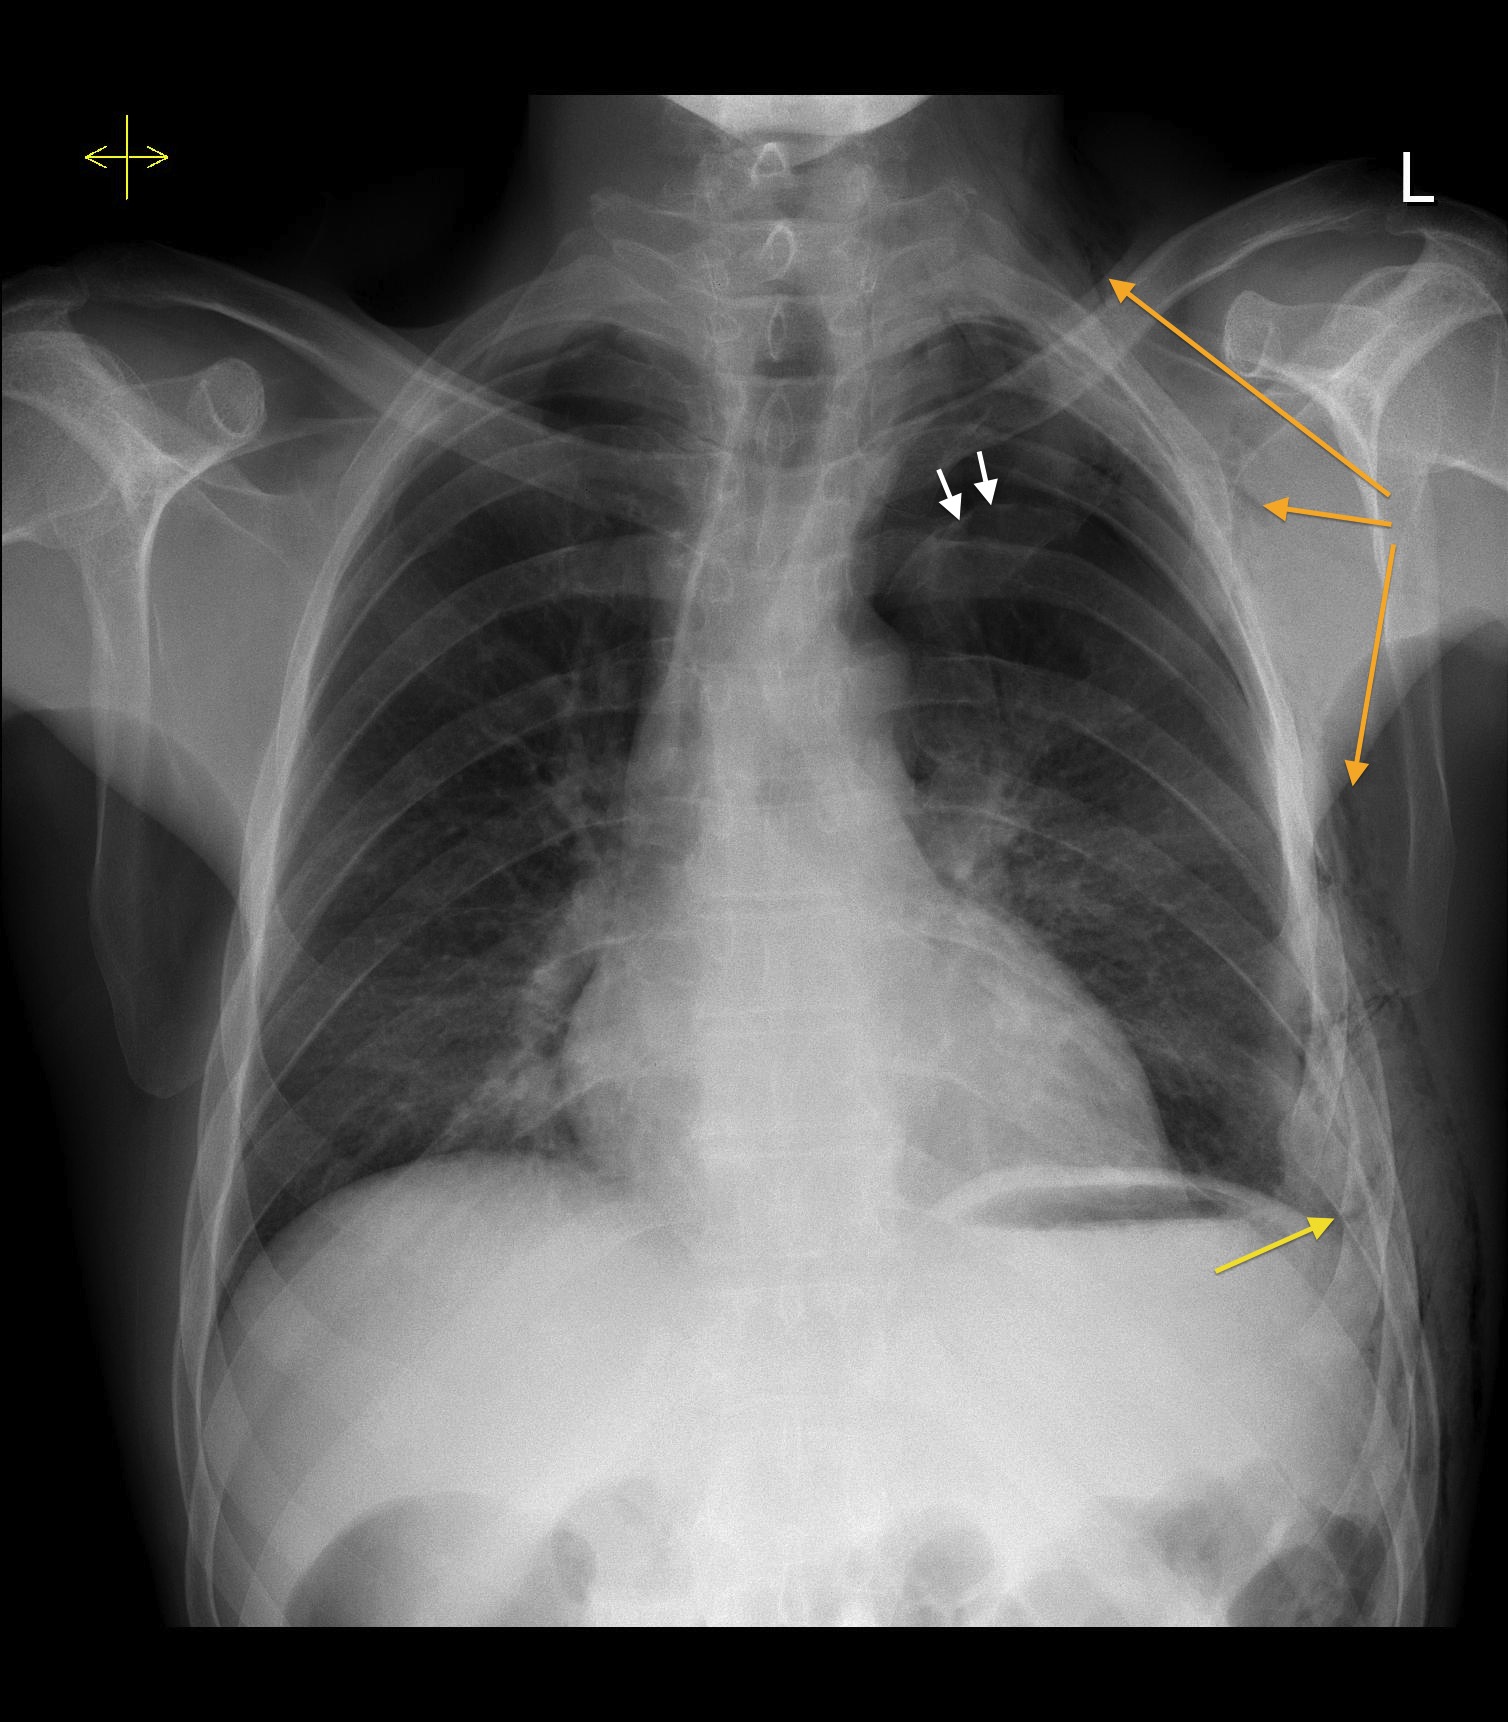 Tension Pneumothorax Due To Rib Fracture Radiology At St Vincent S University Hospital